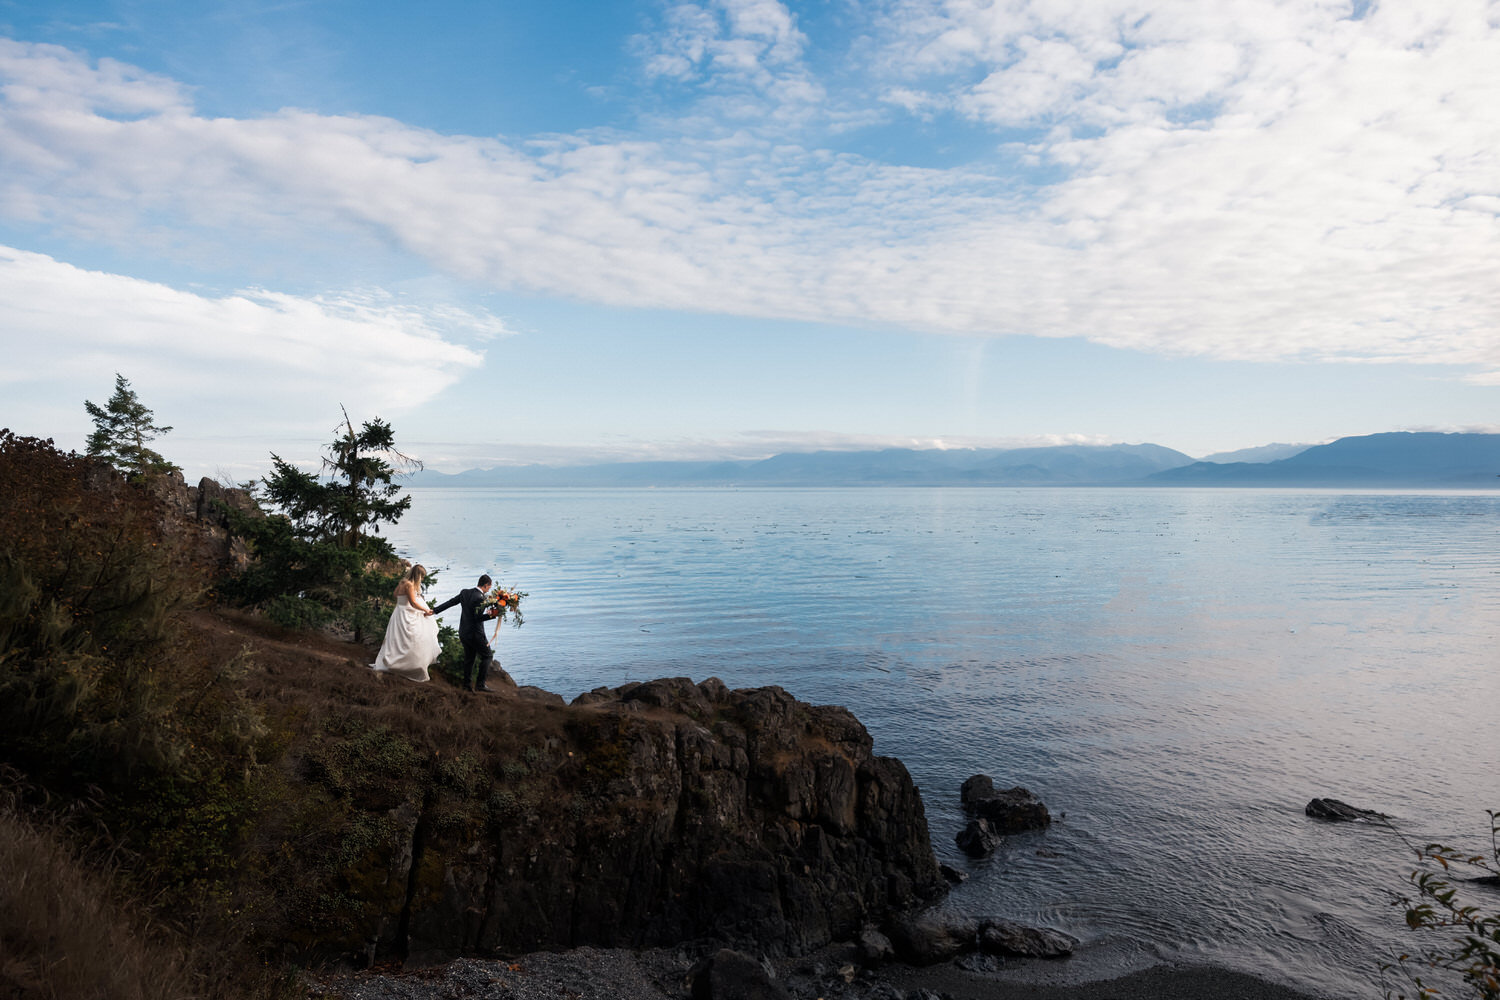 Vancouver Island Adventure Elopement and Small Wedding Photographer - Allie Knull's Photography-41.jpg